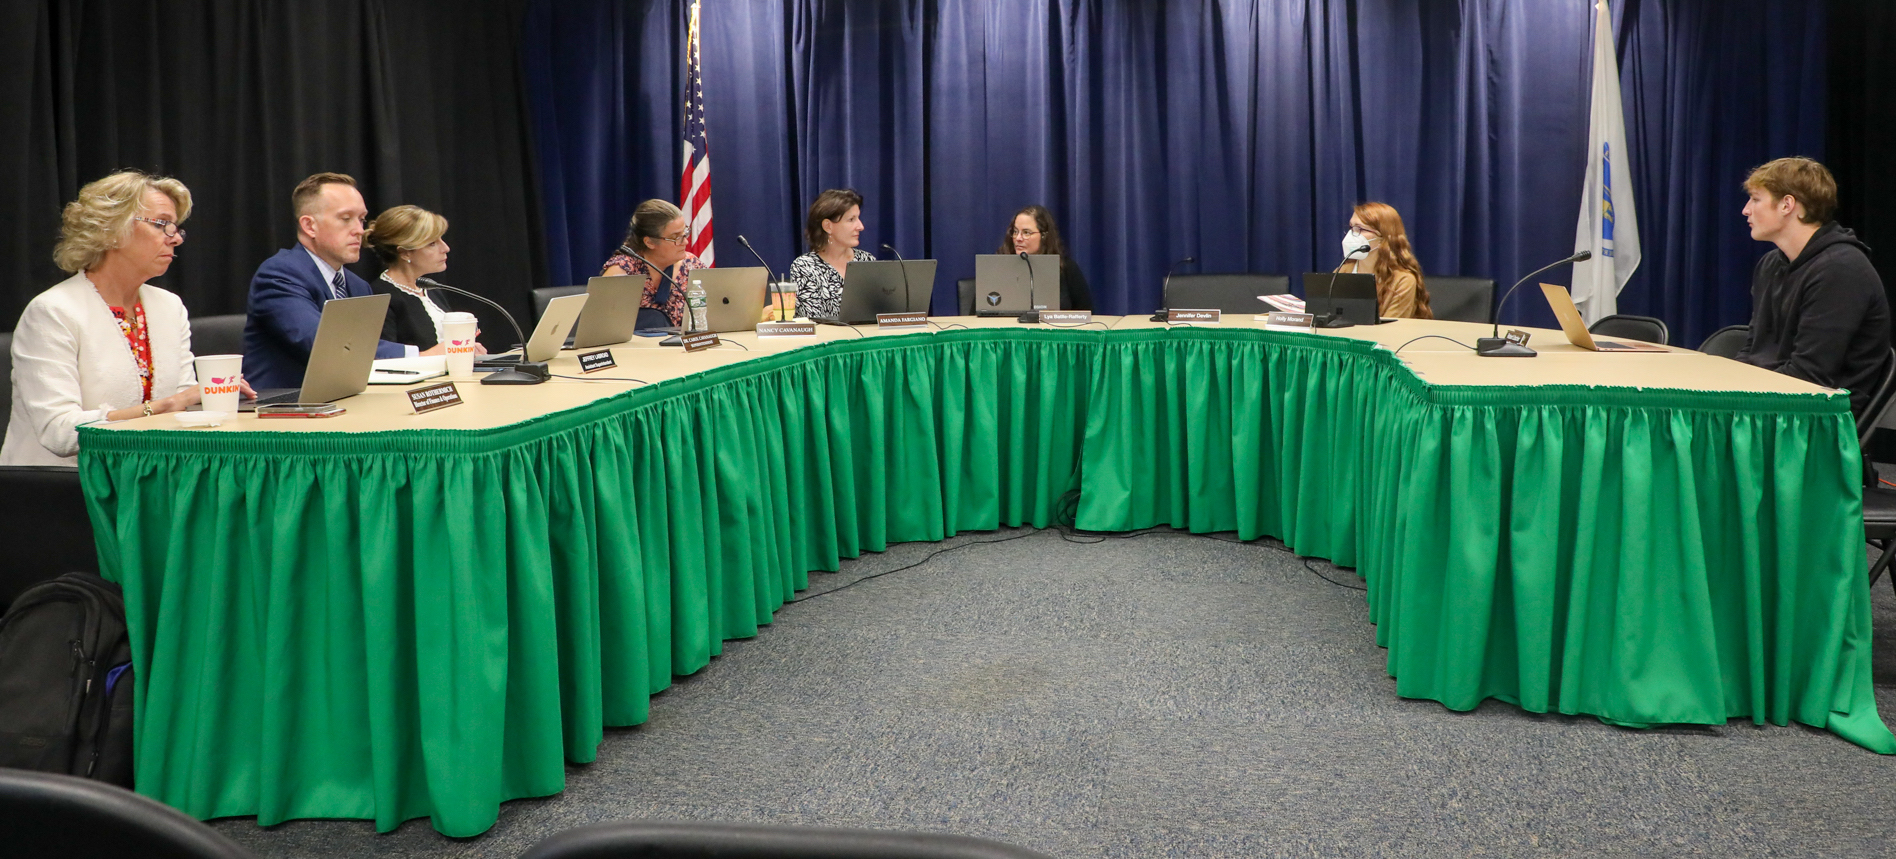 School Committee reviews enrollment figures, attendance policy